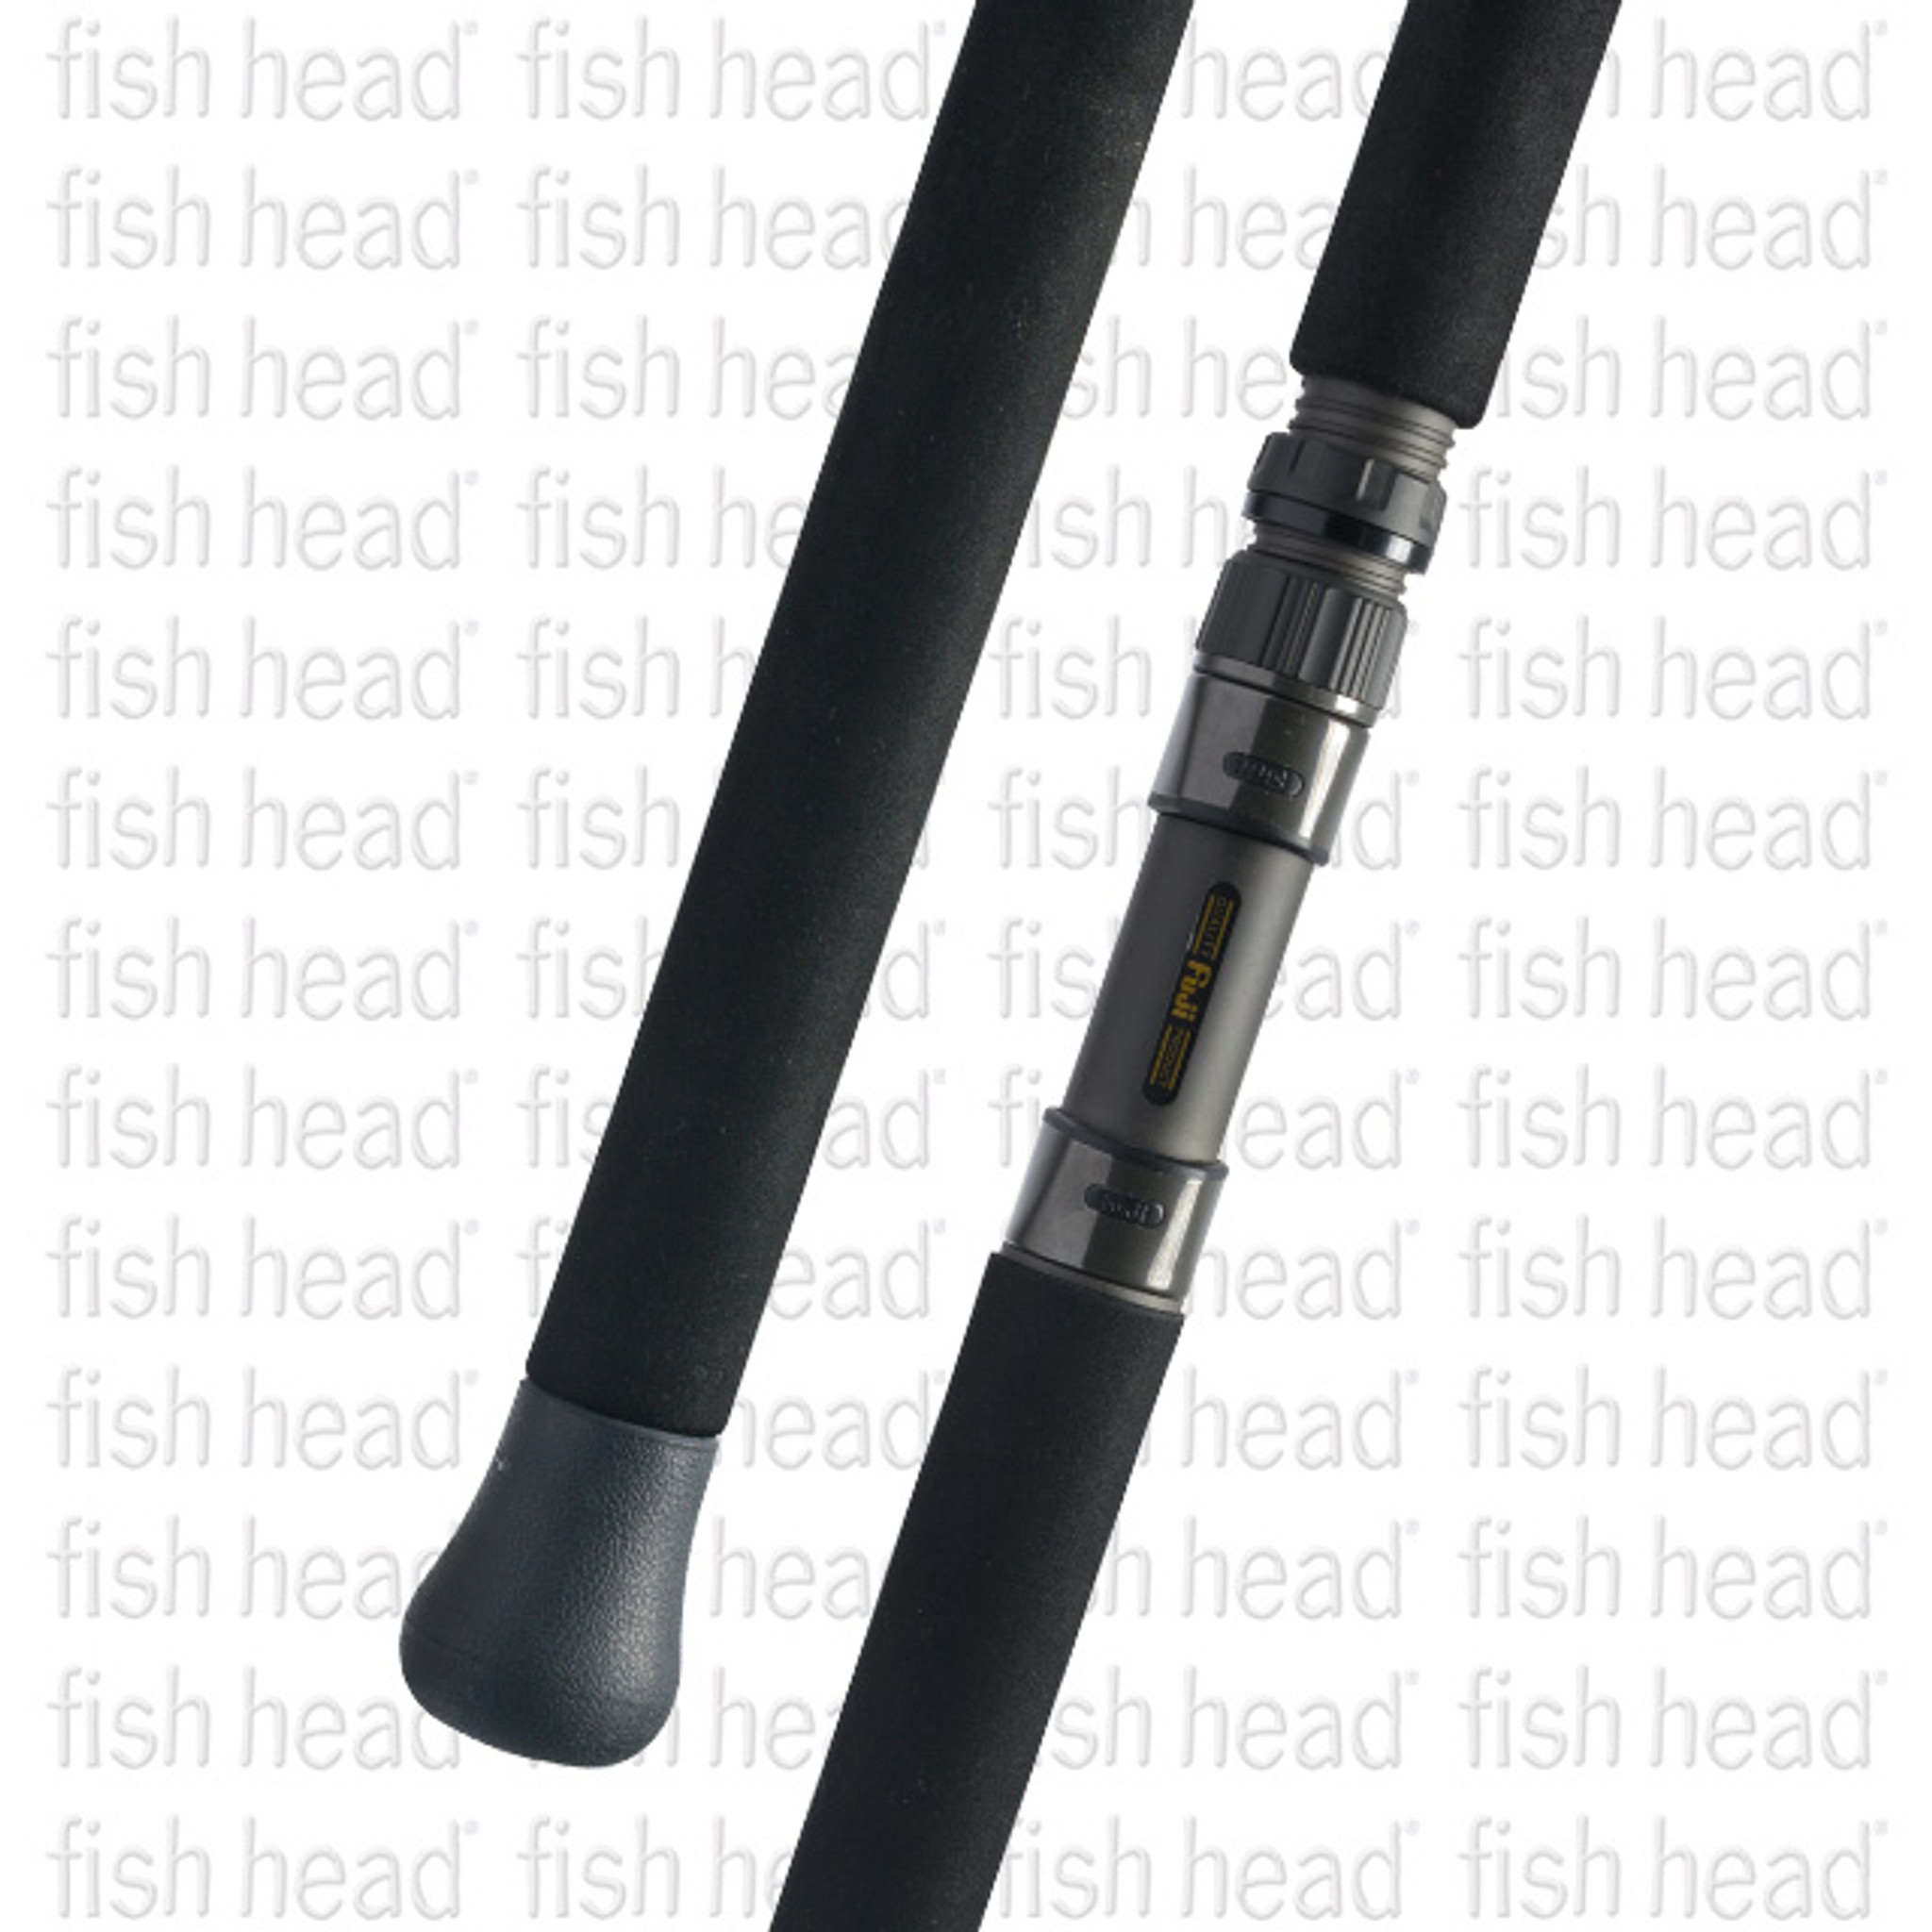 FCL Labo UCB-74 Offshore Spinning Rod